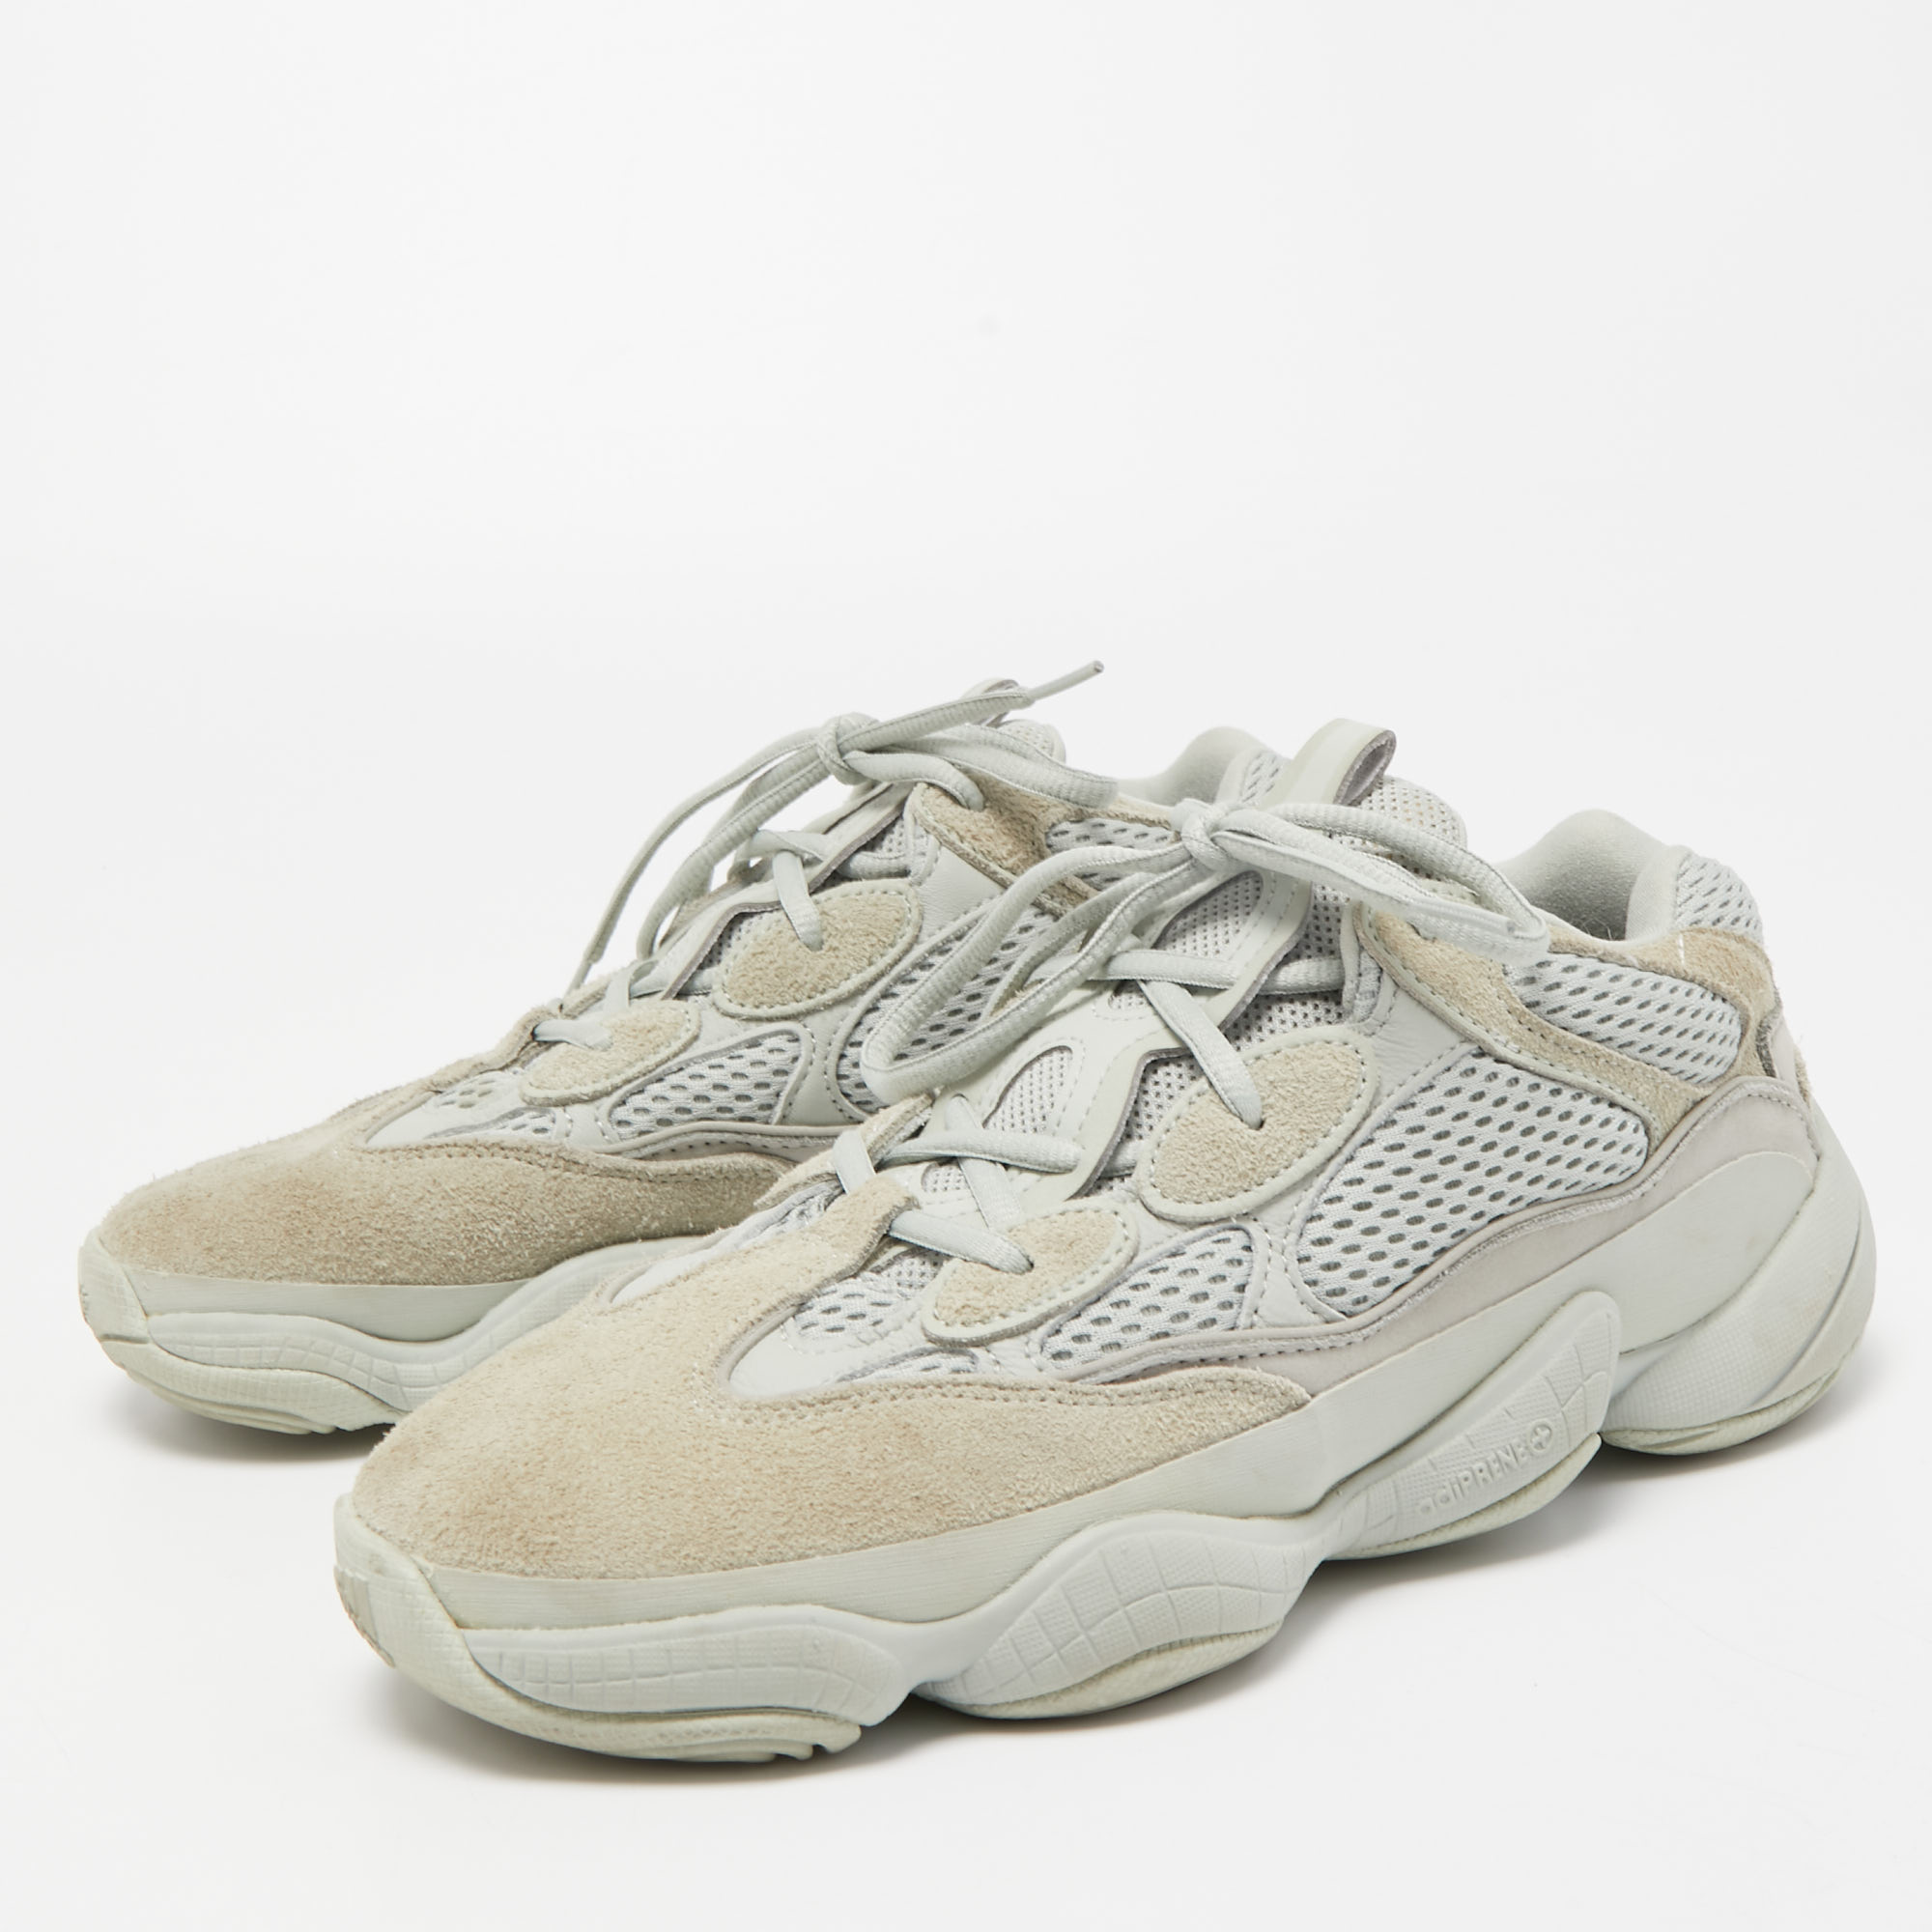 

Yeezy x Adidas Blue Fabric and Leather Yeezy 500 Blush Sneakers Size 41 1/3, Grey